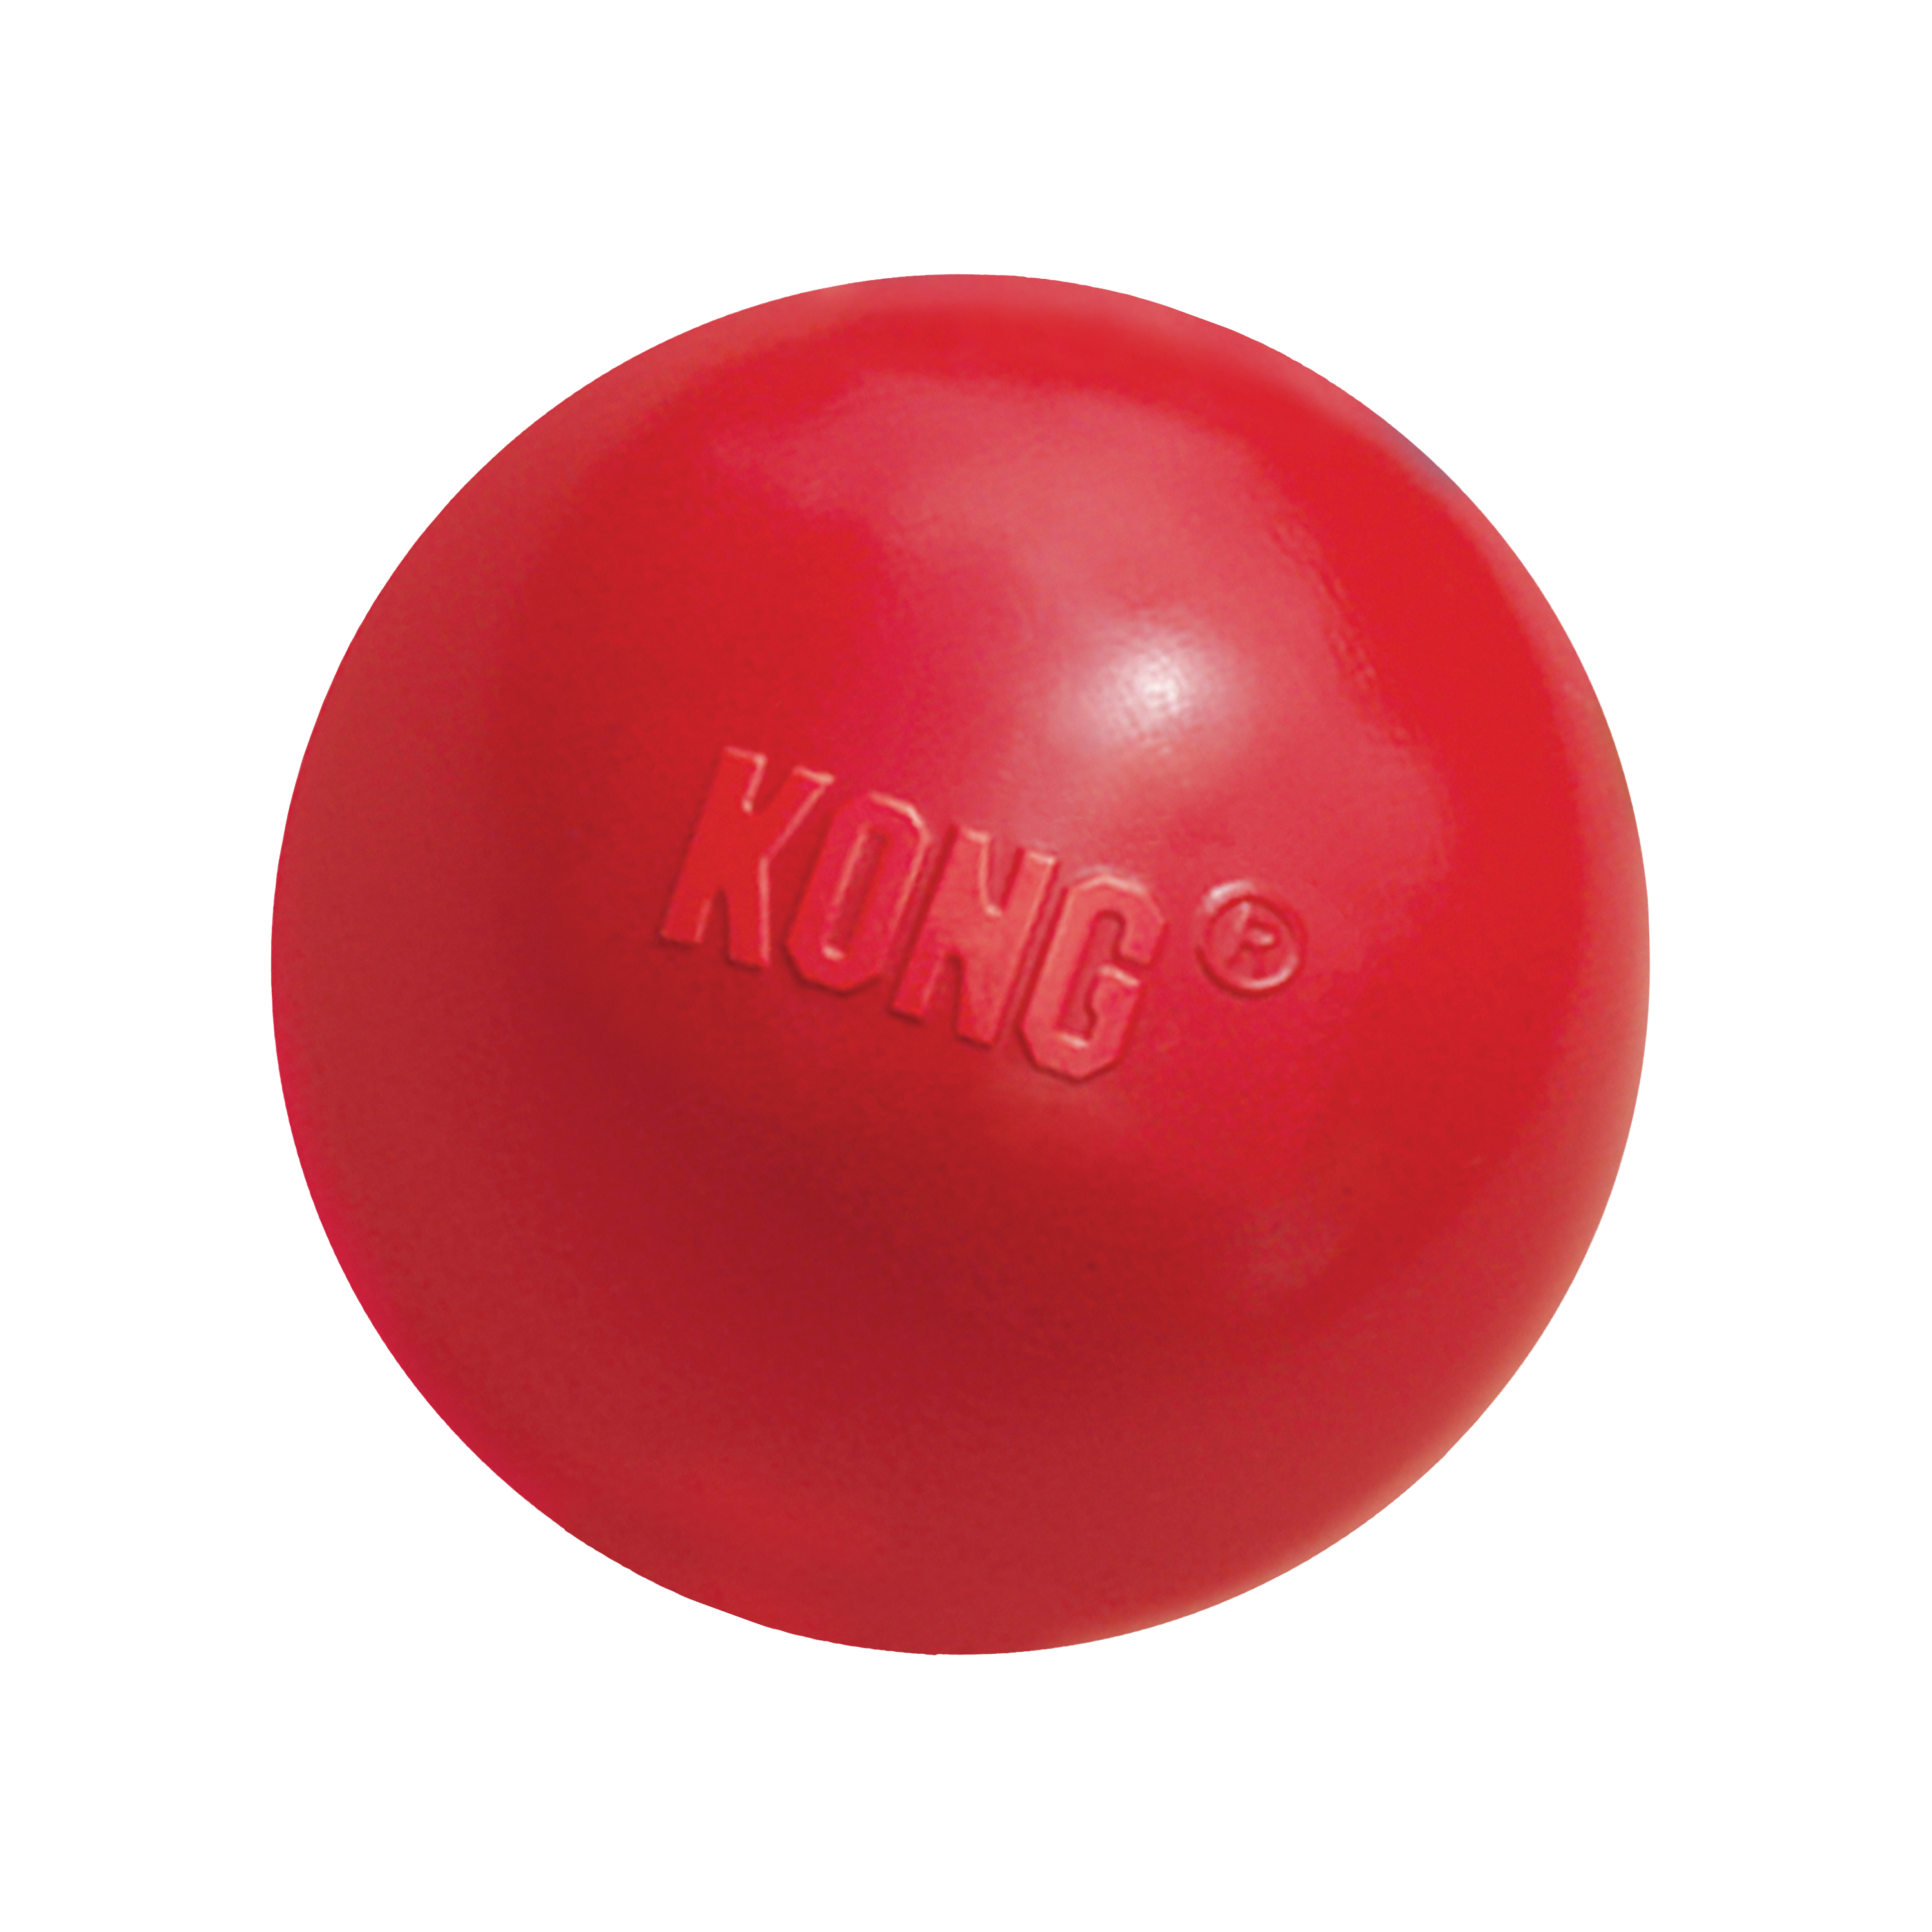 KONG Ball w/Hole offpack product image